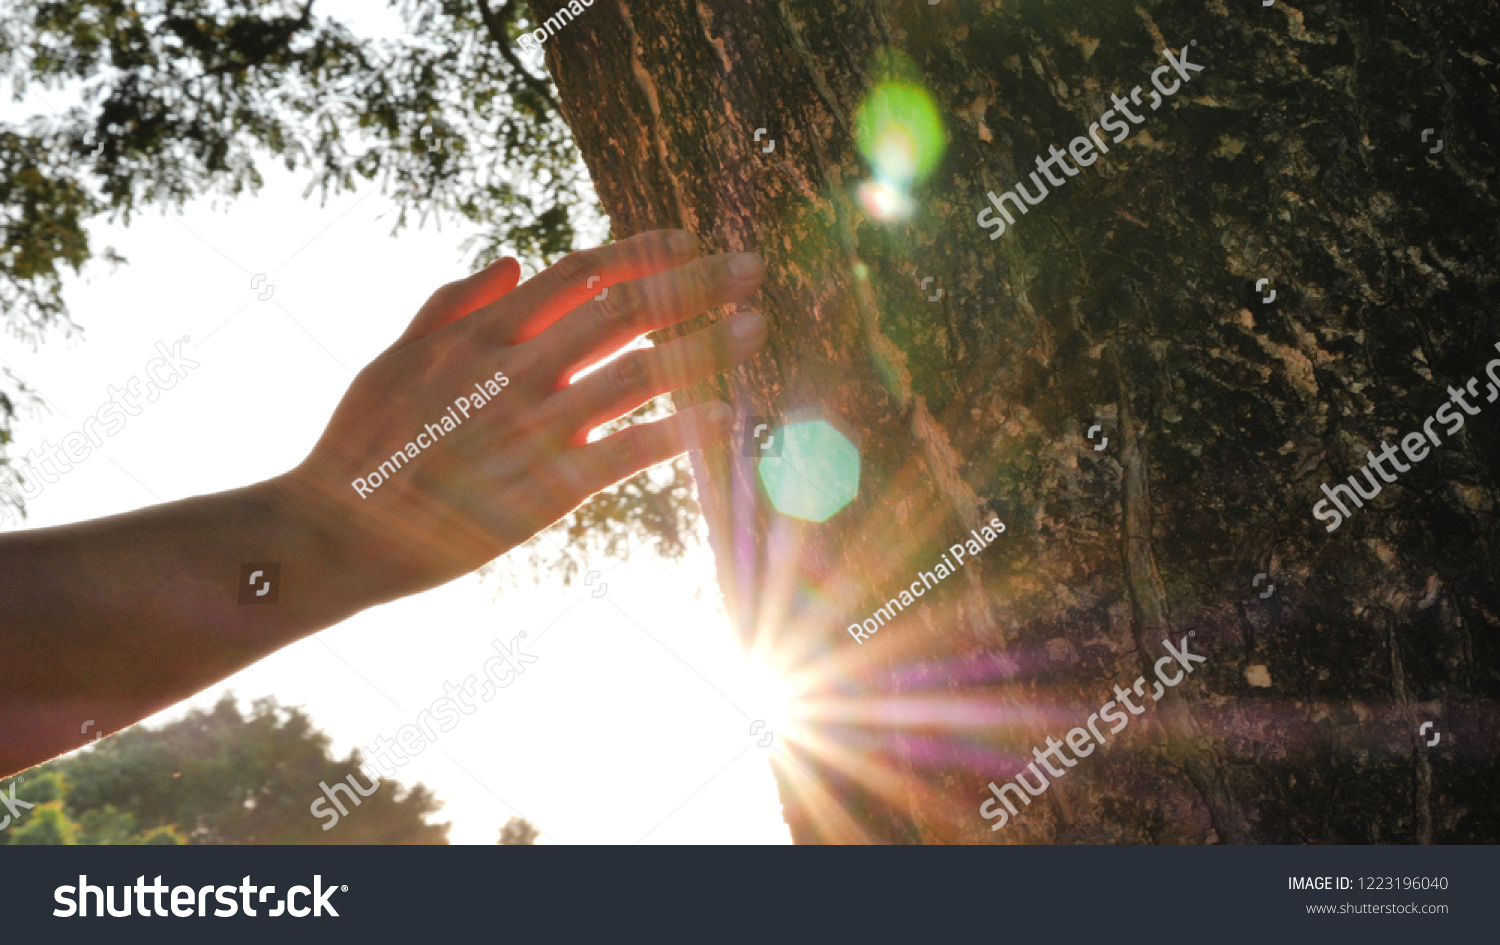 Closeup hand touching a tree trunk in the forest. Human is caring about nature and environment. #1223196040